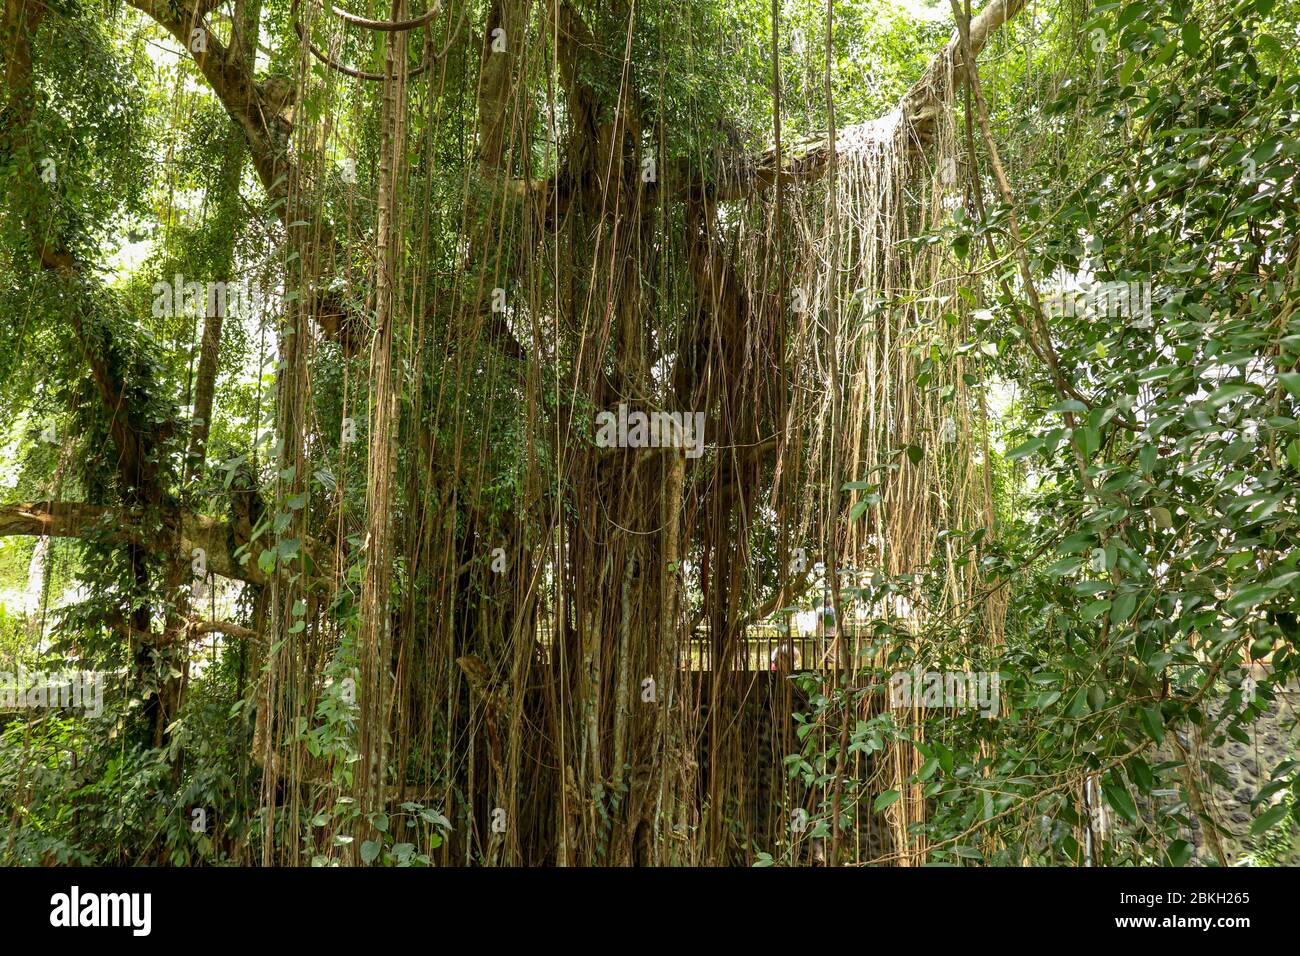 Ficus Elastica covered with long lianas in the rainforest. Rubber Fig or Rubber bush in Gunung Kawi Royal Tomb Valley. Rubber tree, Rubber plant, Indi Stock Photo